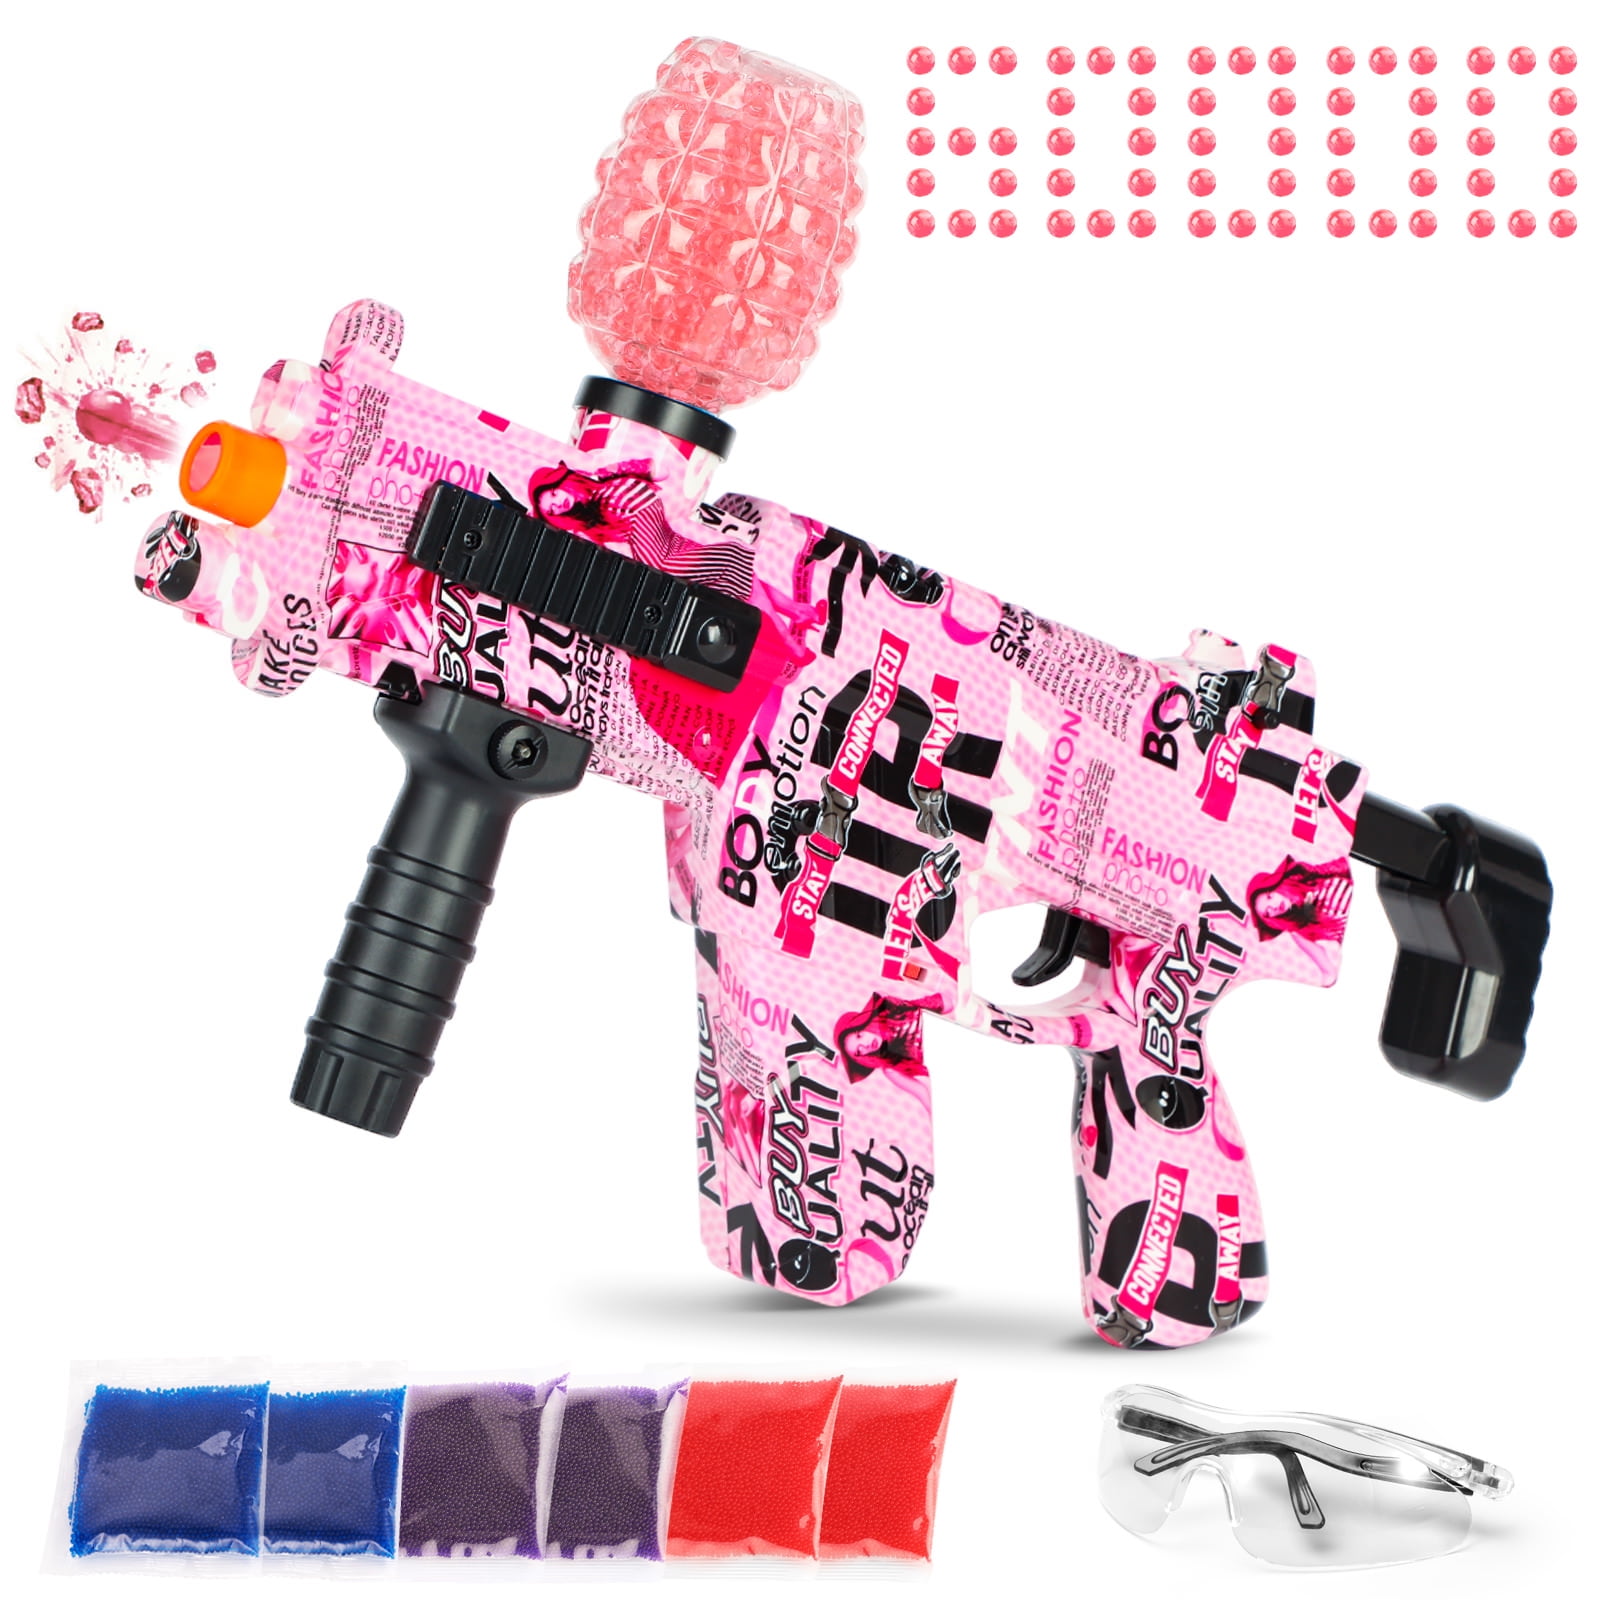 Jfieei Gel Blaster Electric with Gel Ball Blaster for Outdoor Activity, Shooting Team Game w/ 60000 Water Beads and Goggles for Adults and Kids,Pink